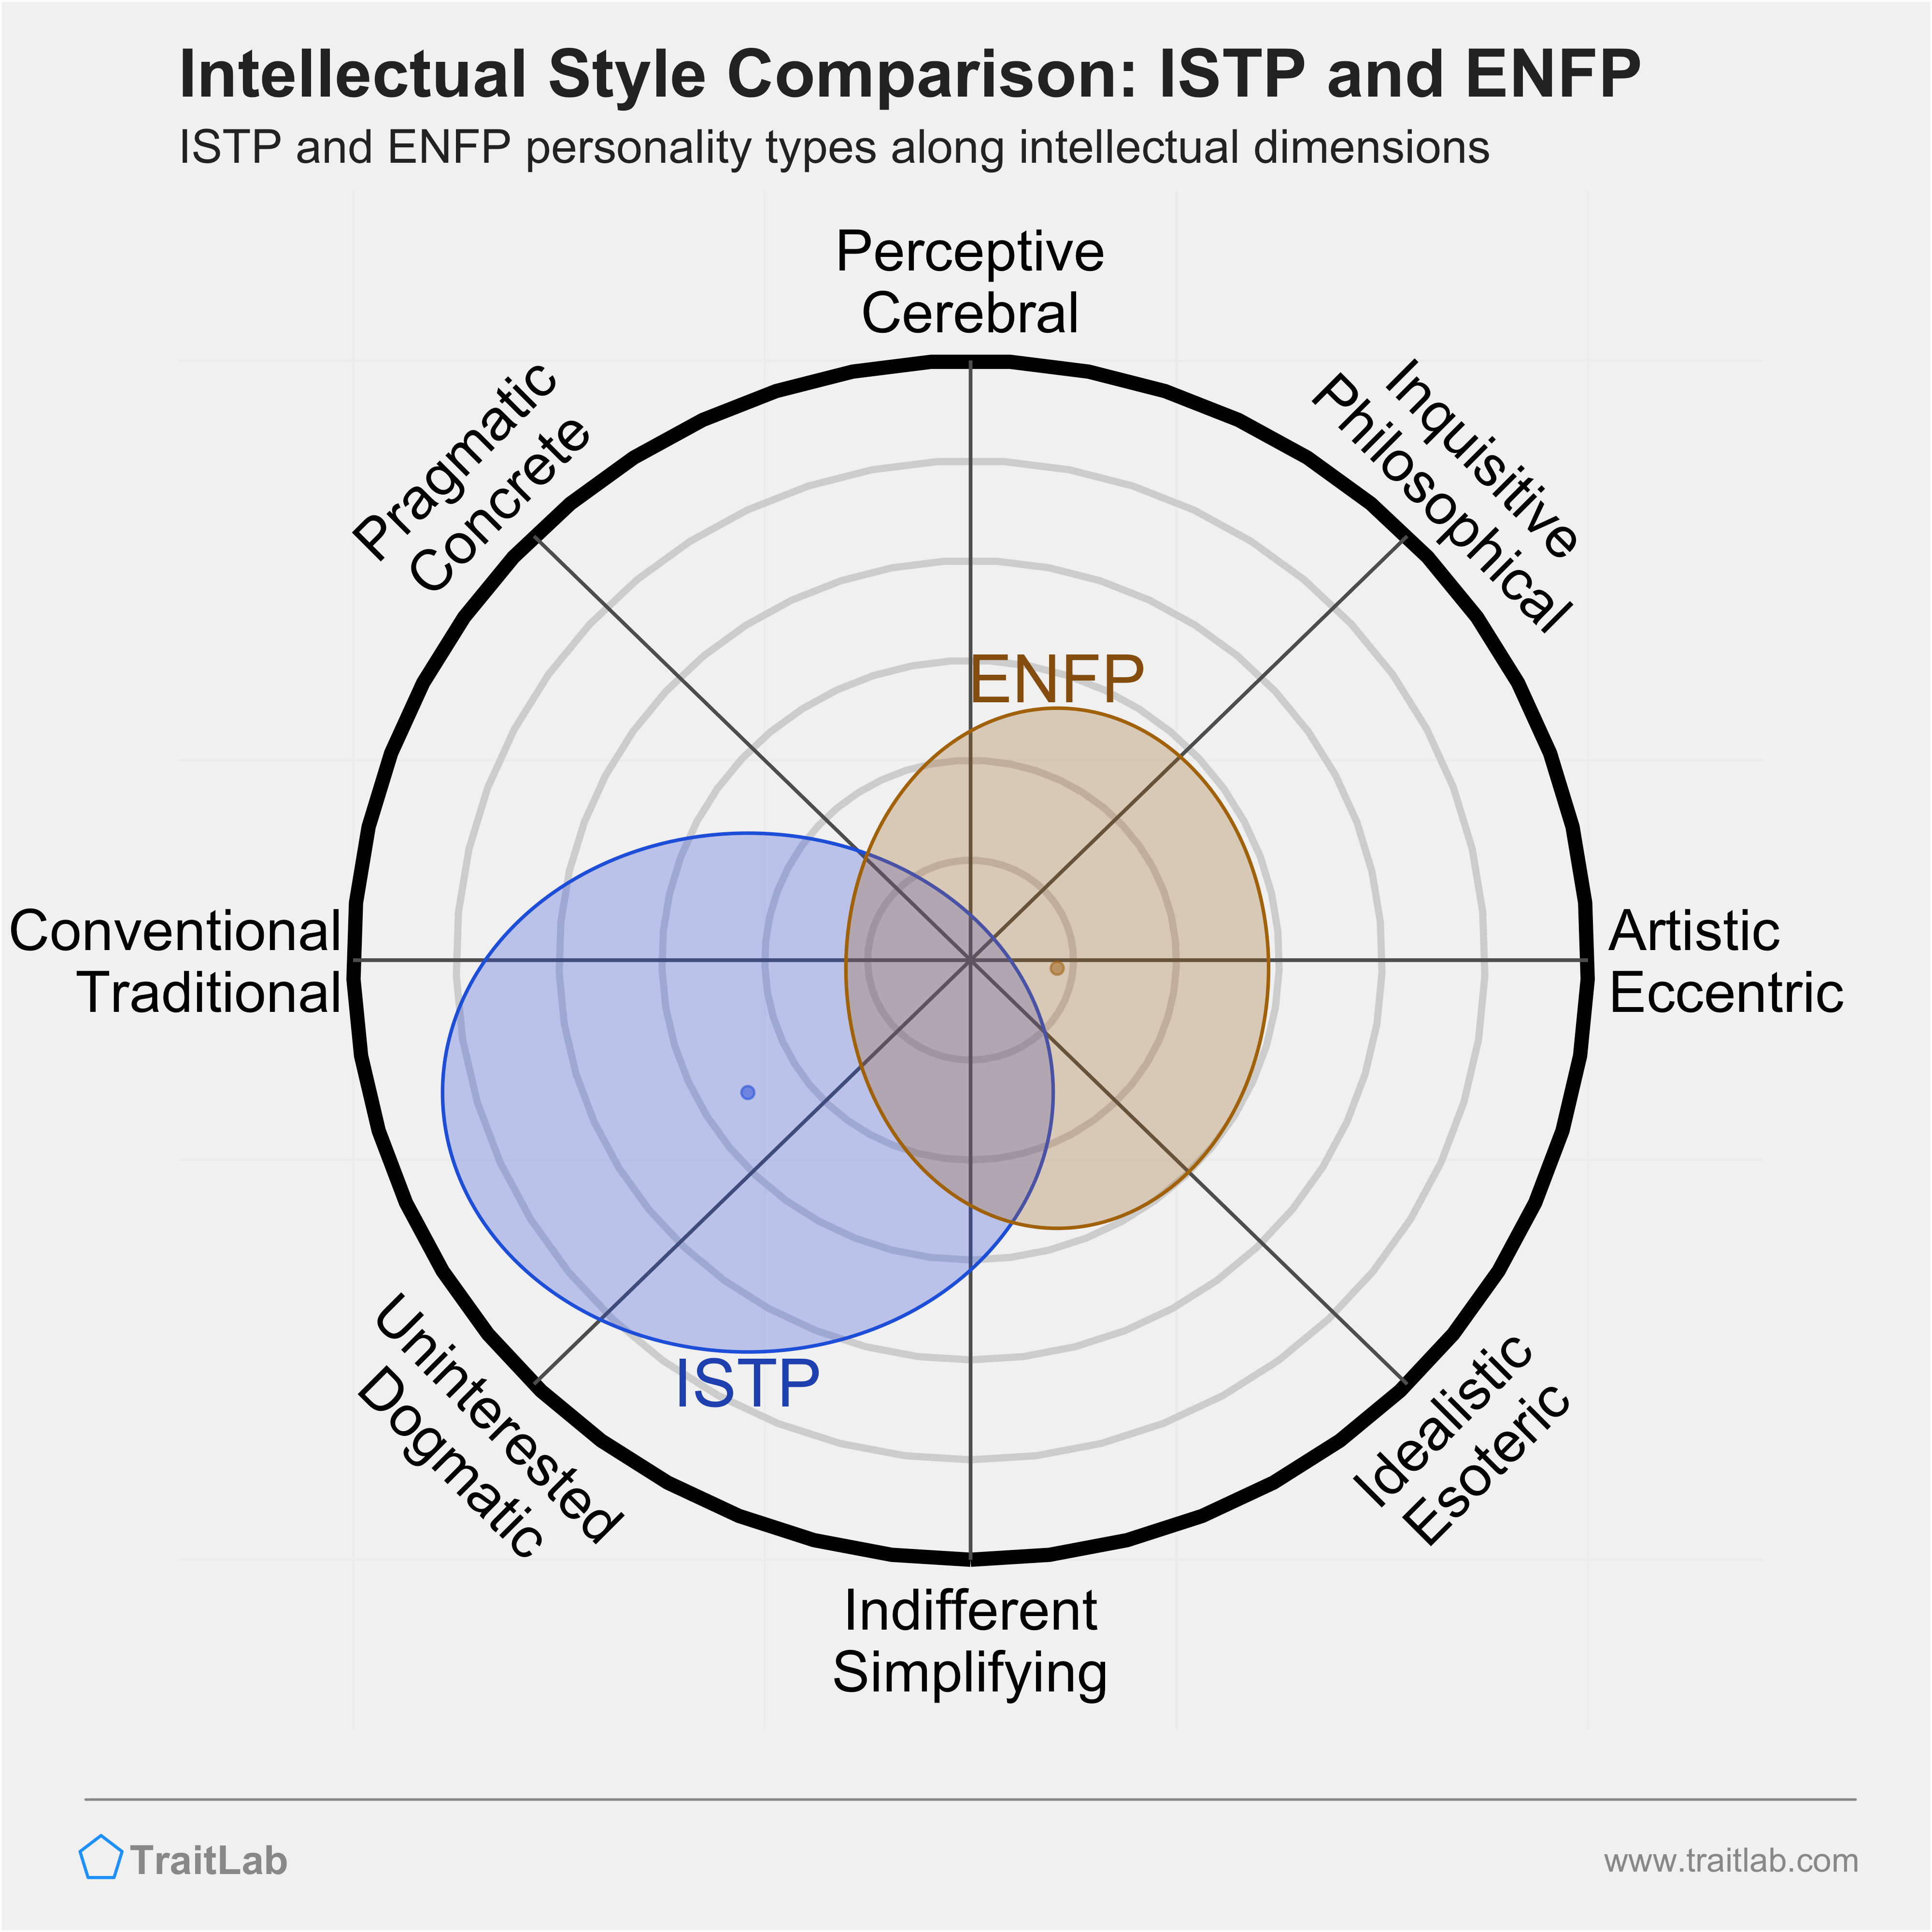 ISTP and ENFP comparison across intellectual dimensions